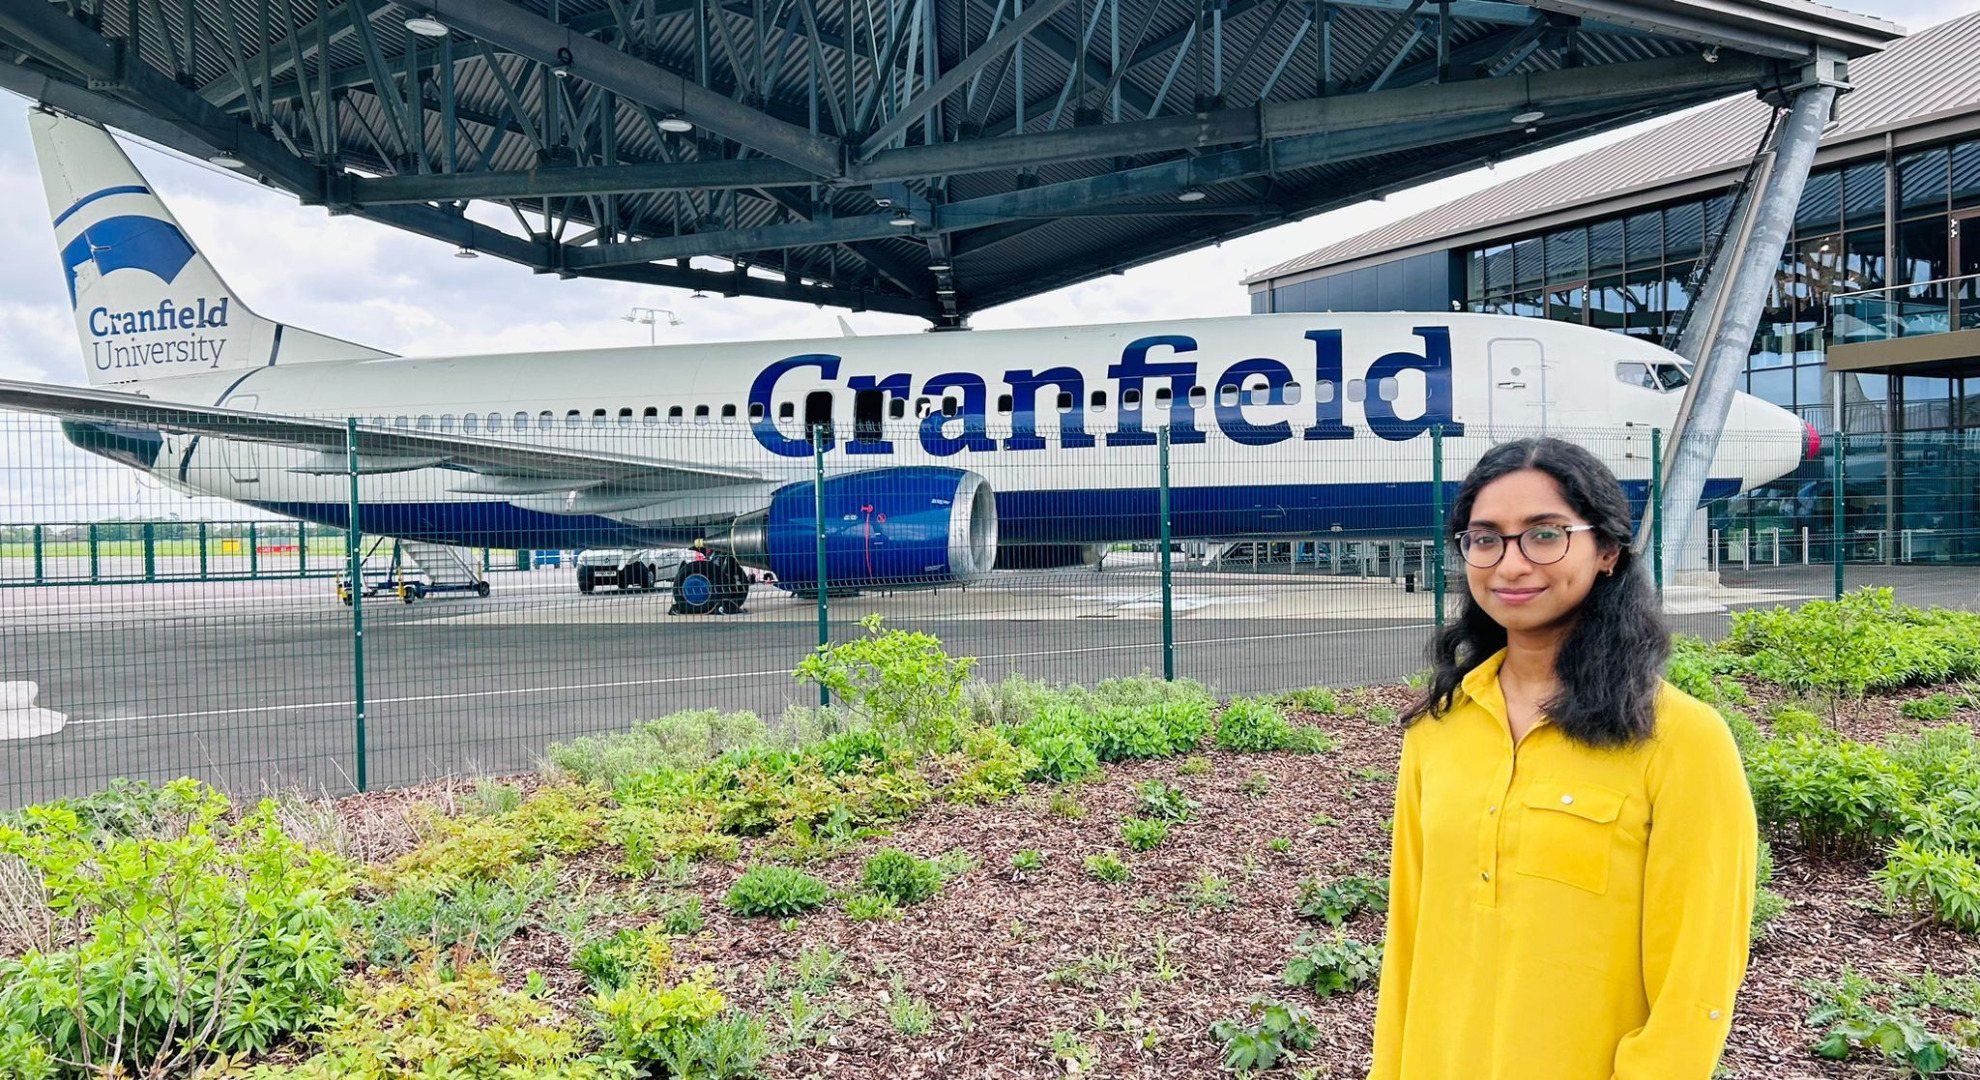 Jesintha standing outside the Cranfield Boeing 737-800 aircraft.